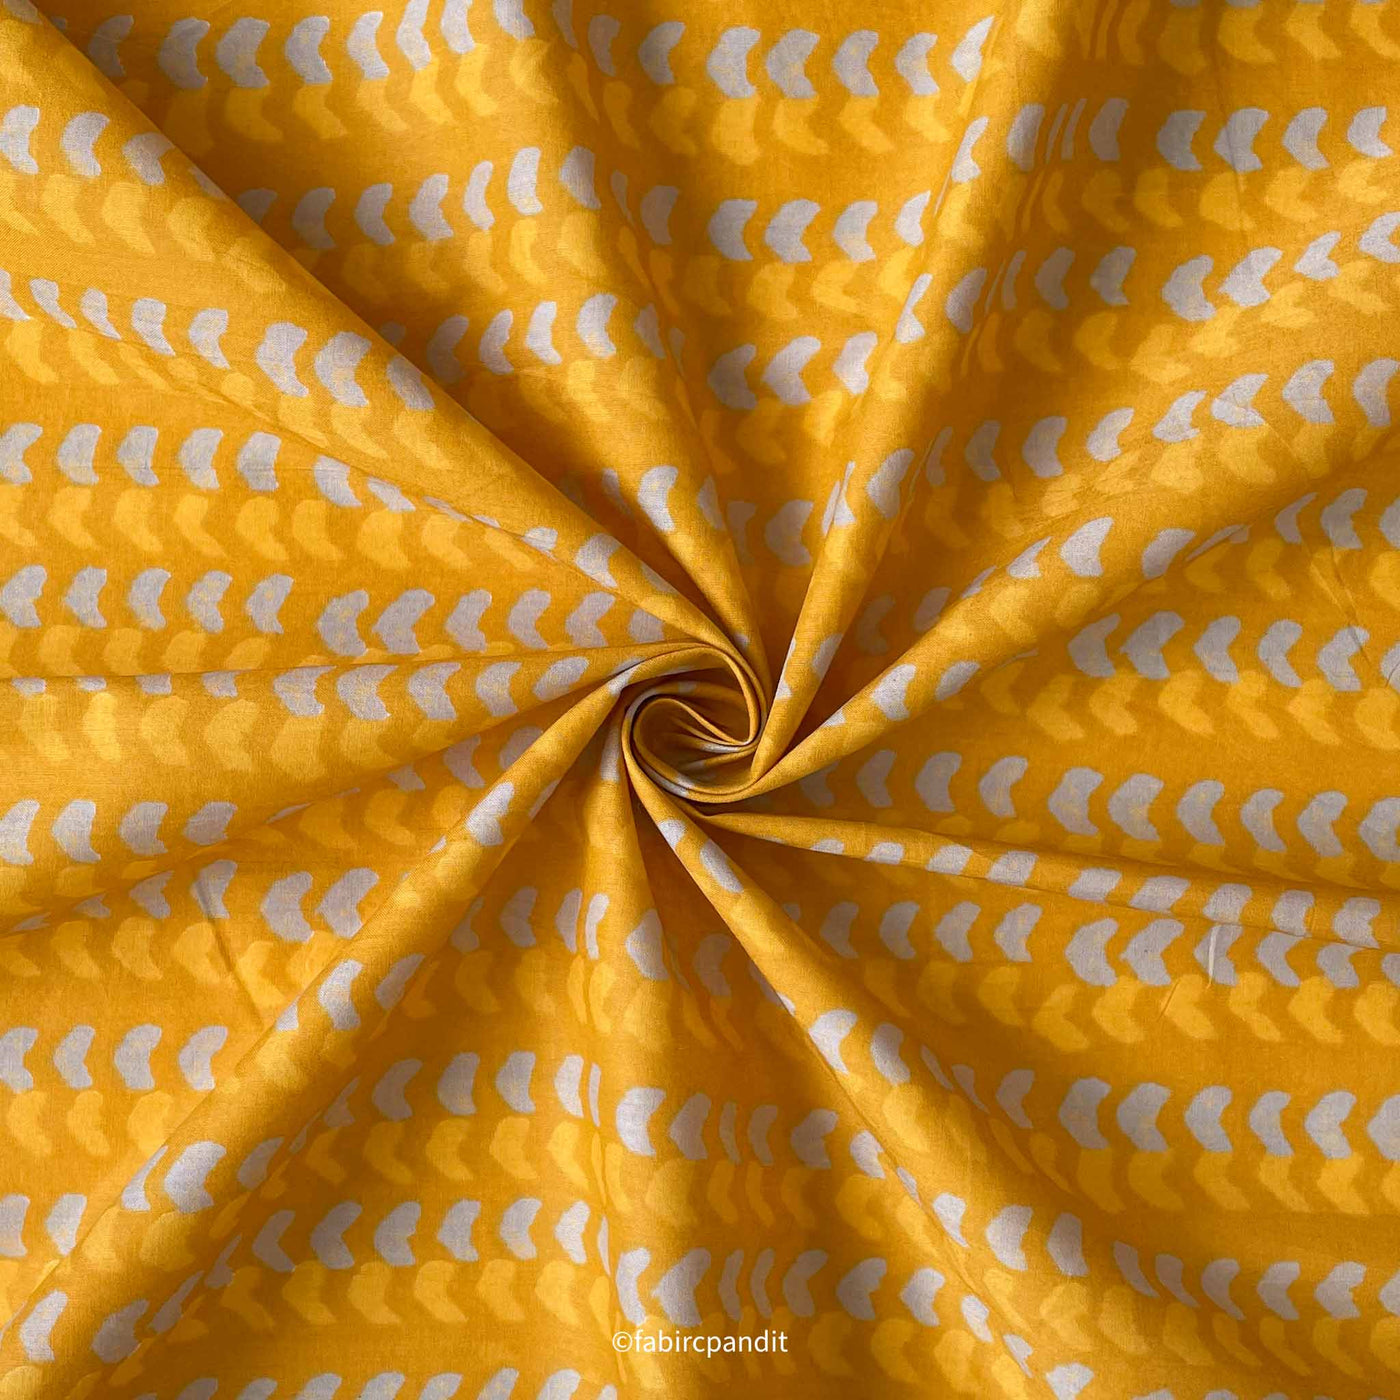 Fabric Pandit Cut Piece (Cut Piece) Dusty Yellow and Grey Geometric Stripes Hand Block Printed Pure Cotton Fabric (Width 43 inches)